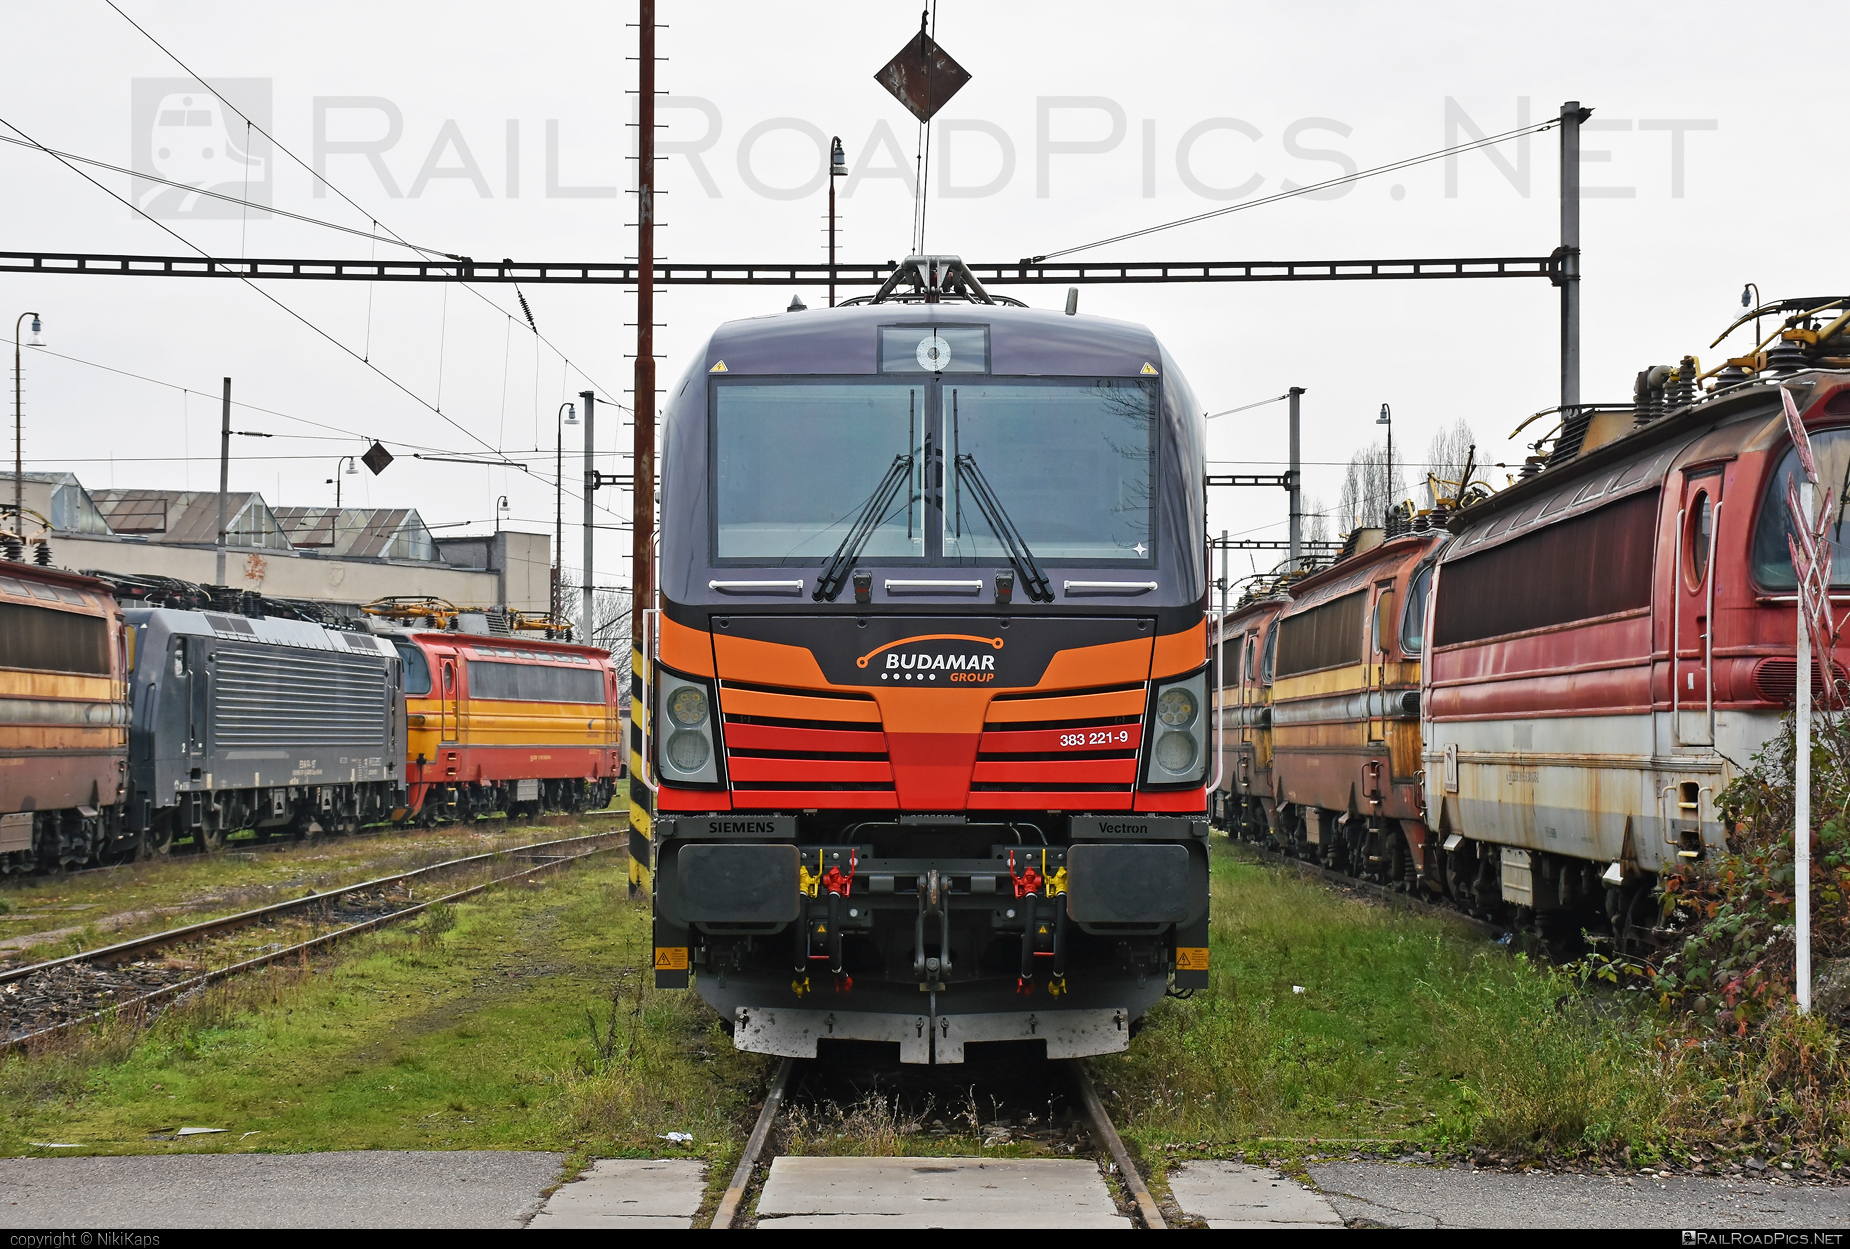 Siemens Vectron MS - 383 221-9 operated by LOKORAIL, a.s. #RollingStockLease #RollingStockLeaseSro #budamar #lokorail #lrl #raill #siemens #siemensVectron #siemensVectronMS #vectron #vectronMS